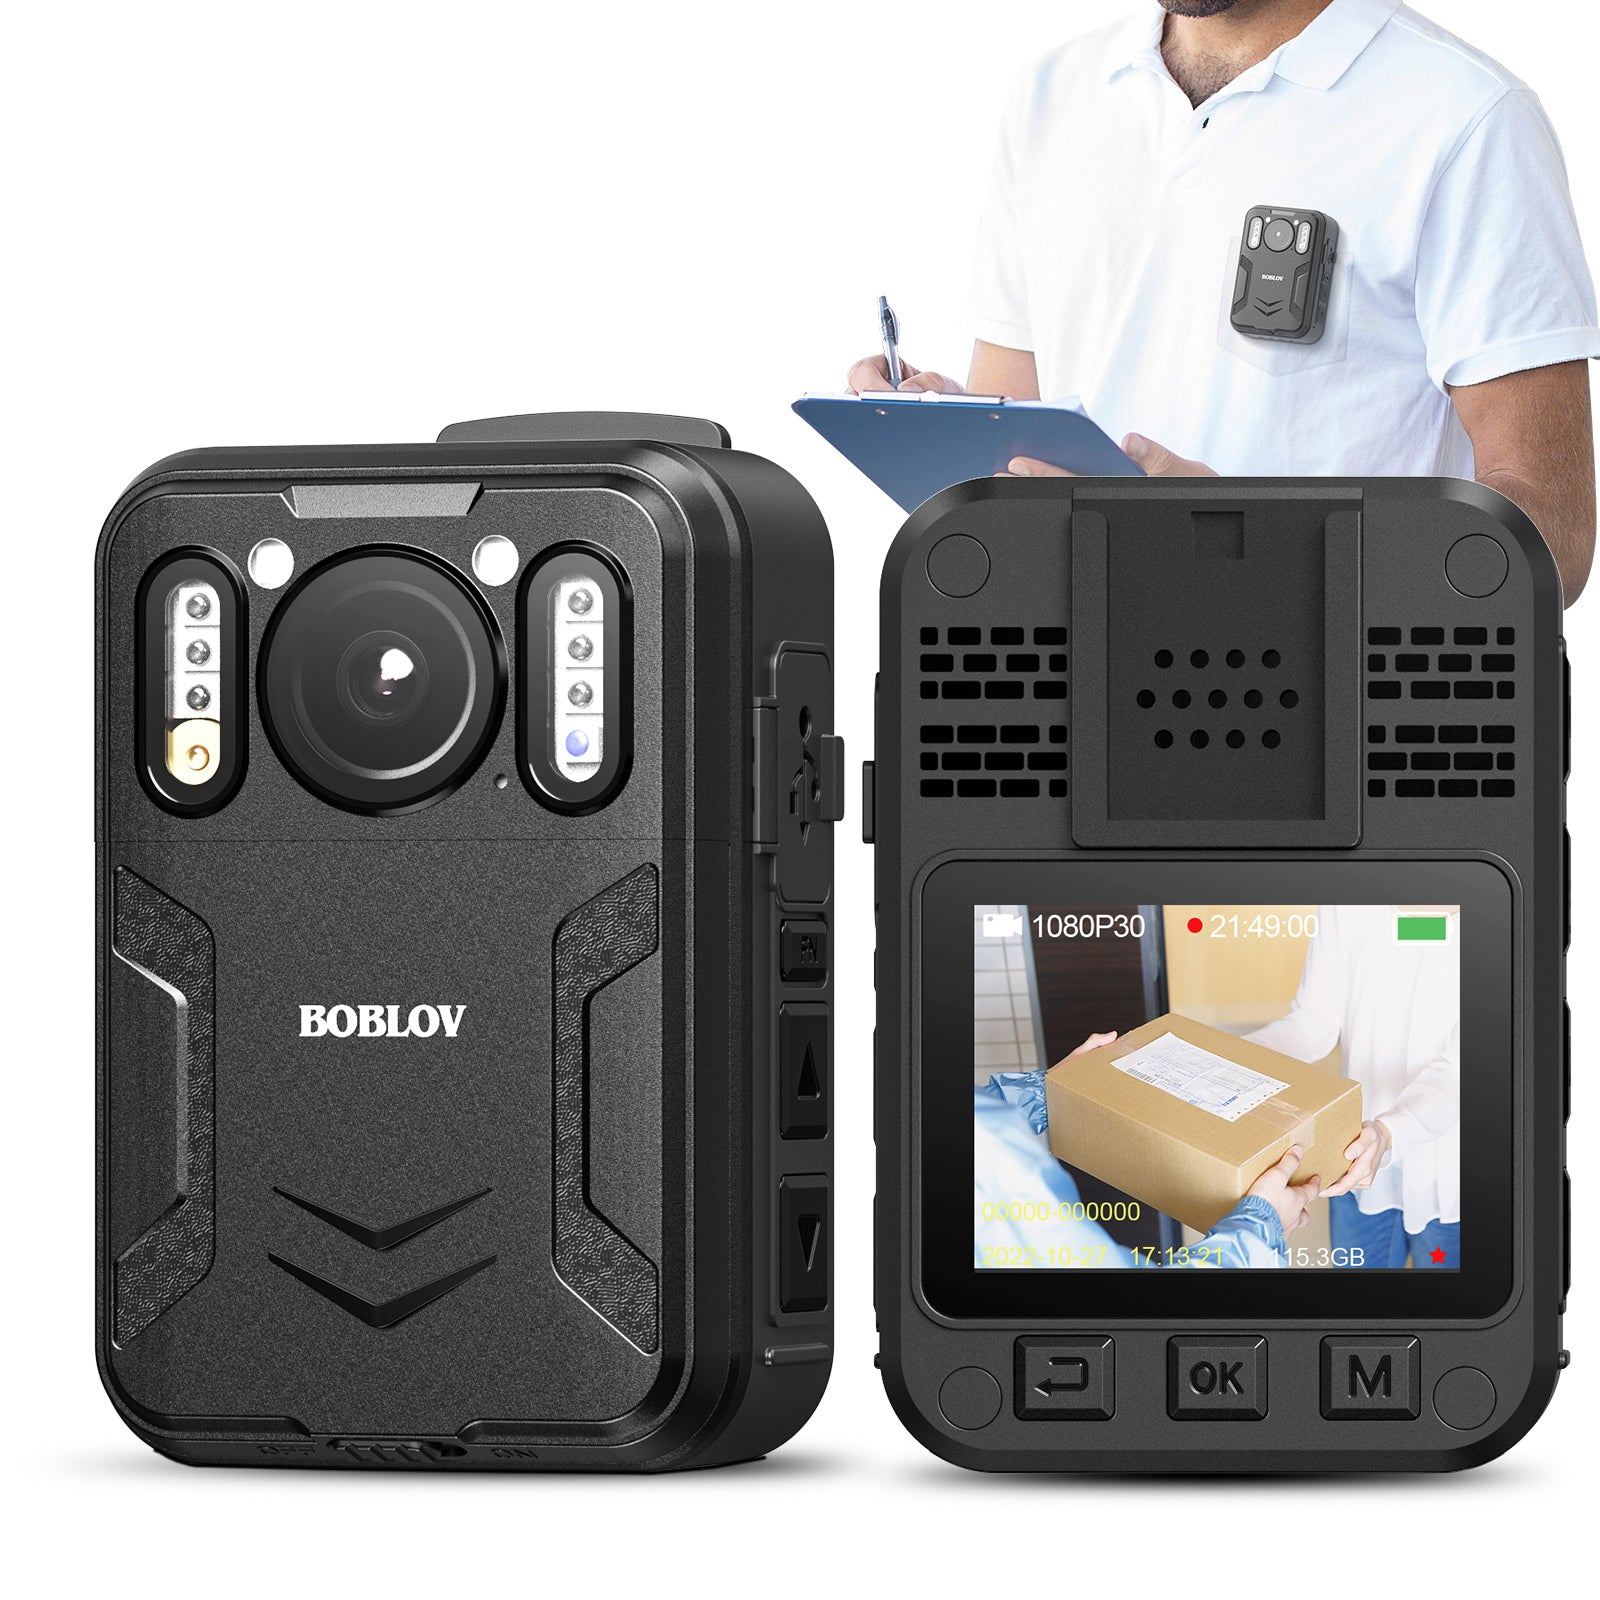 BOBLOV B4K2 4K body camera with GPS and two 3000mAh batteries for extended 14-16 hours recording, including charging dock9